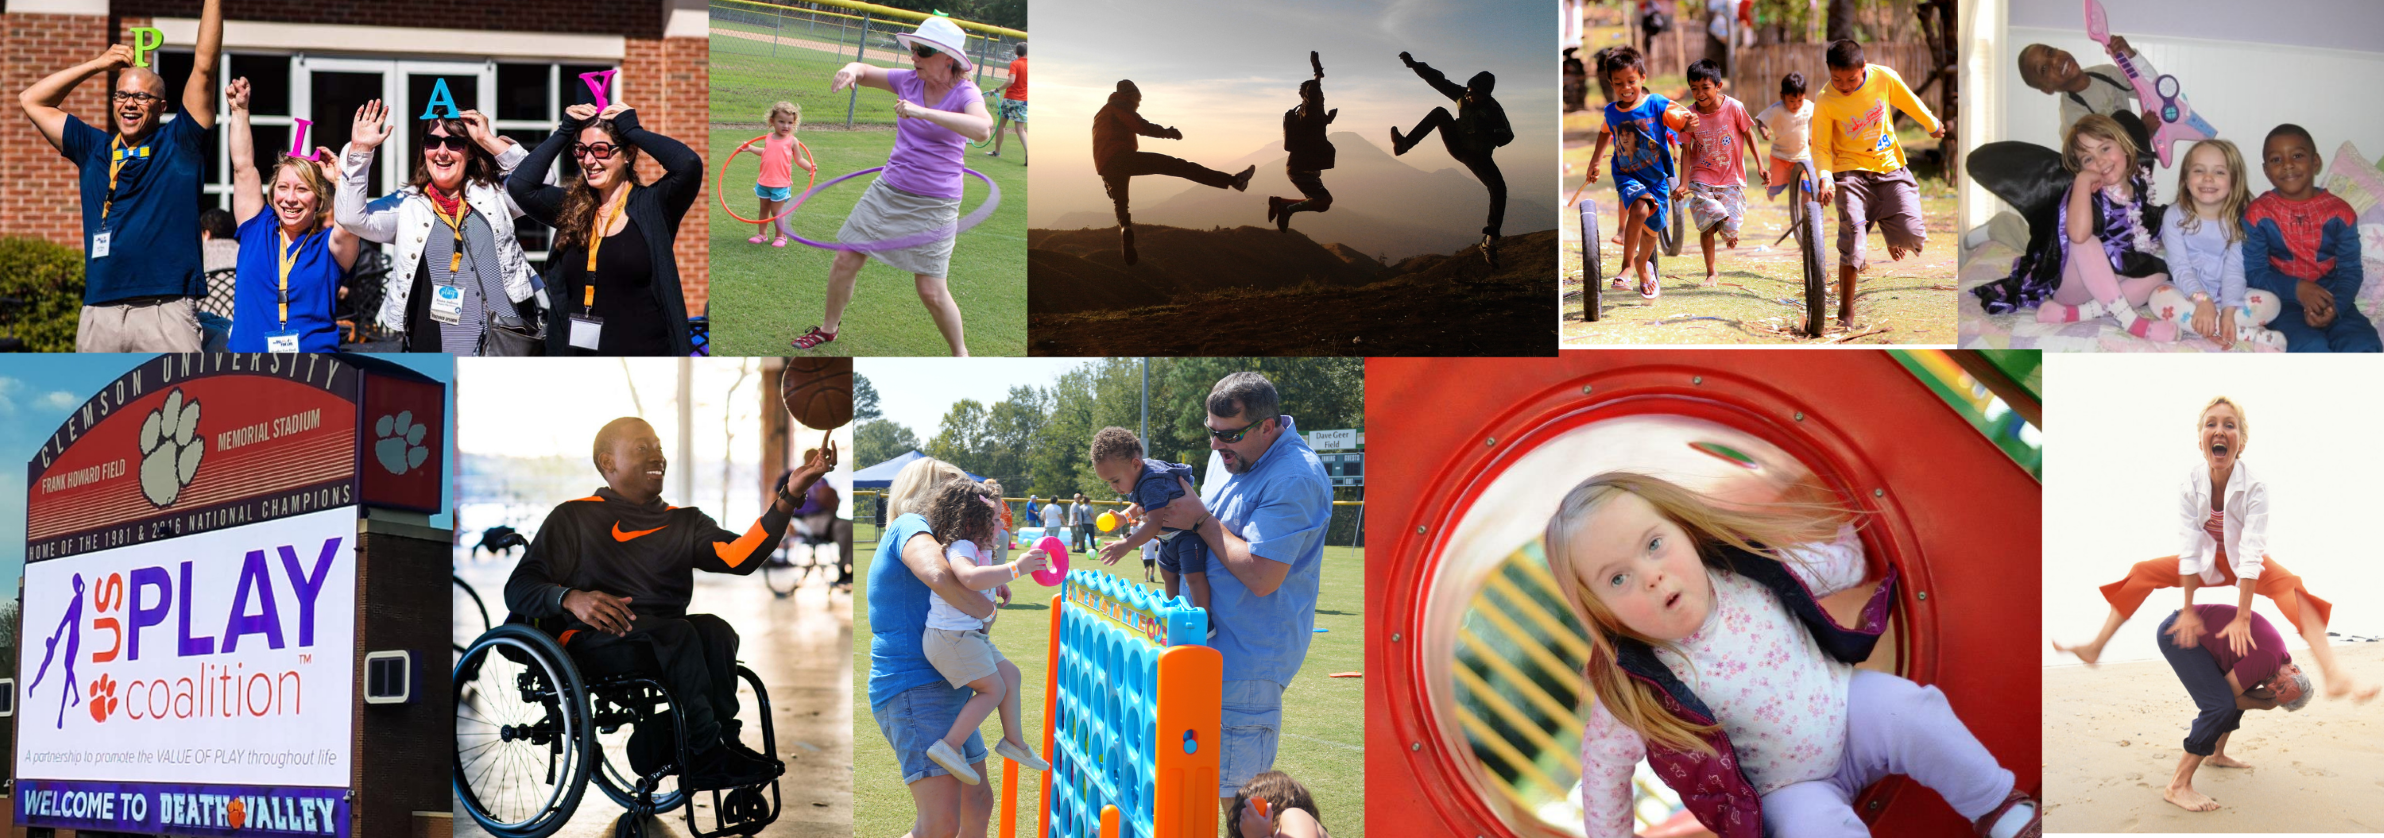 US Play Co - Collage of Event Photos with Adults and Children